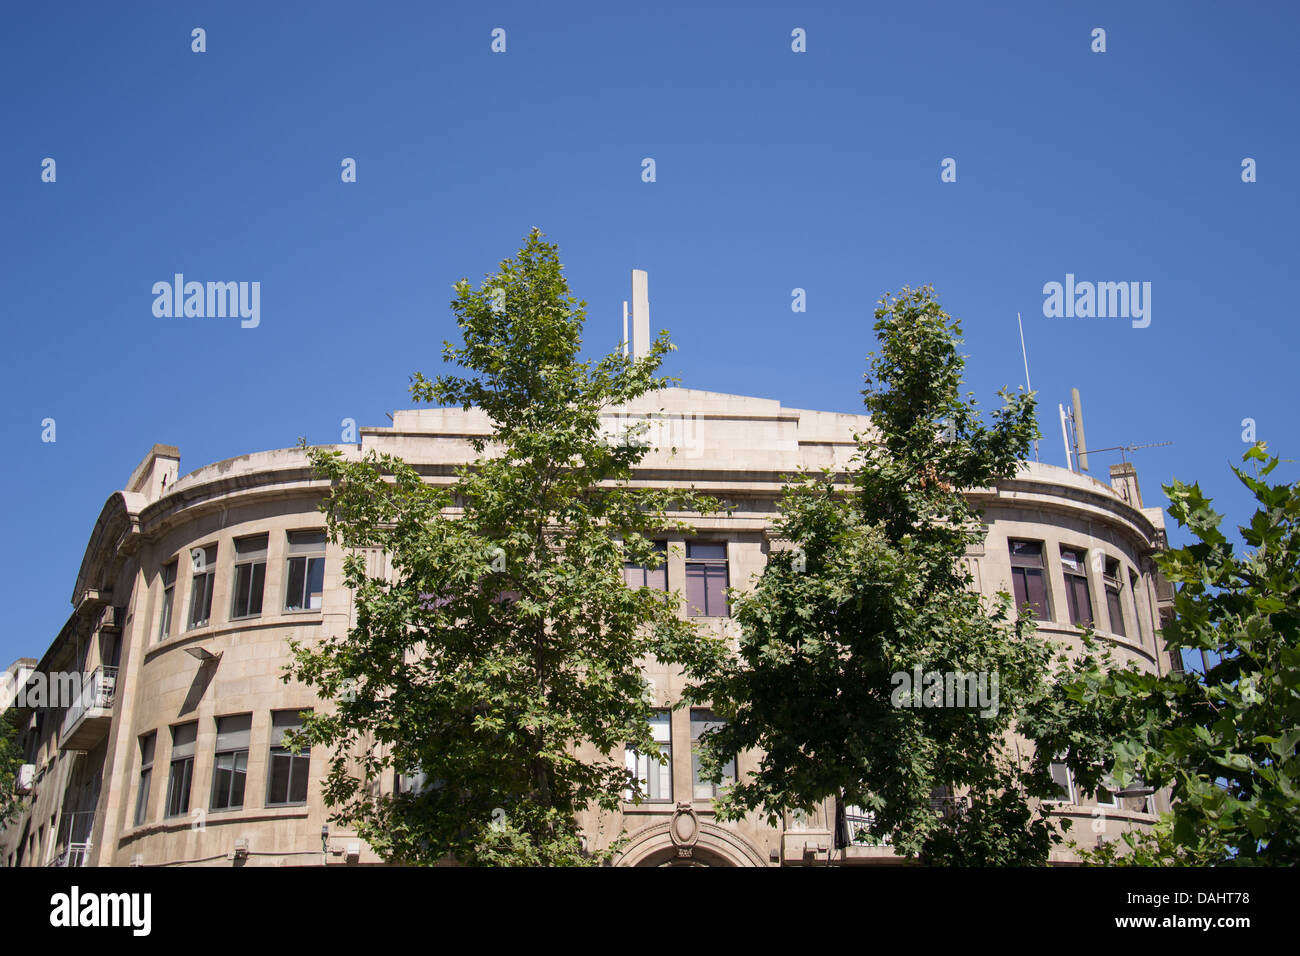 Old brick building against a clear blue sky with trees Stock Photo